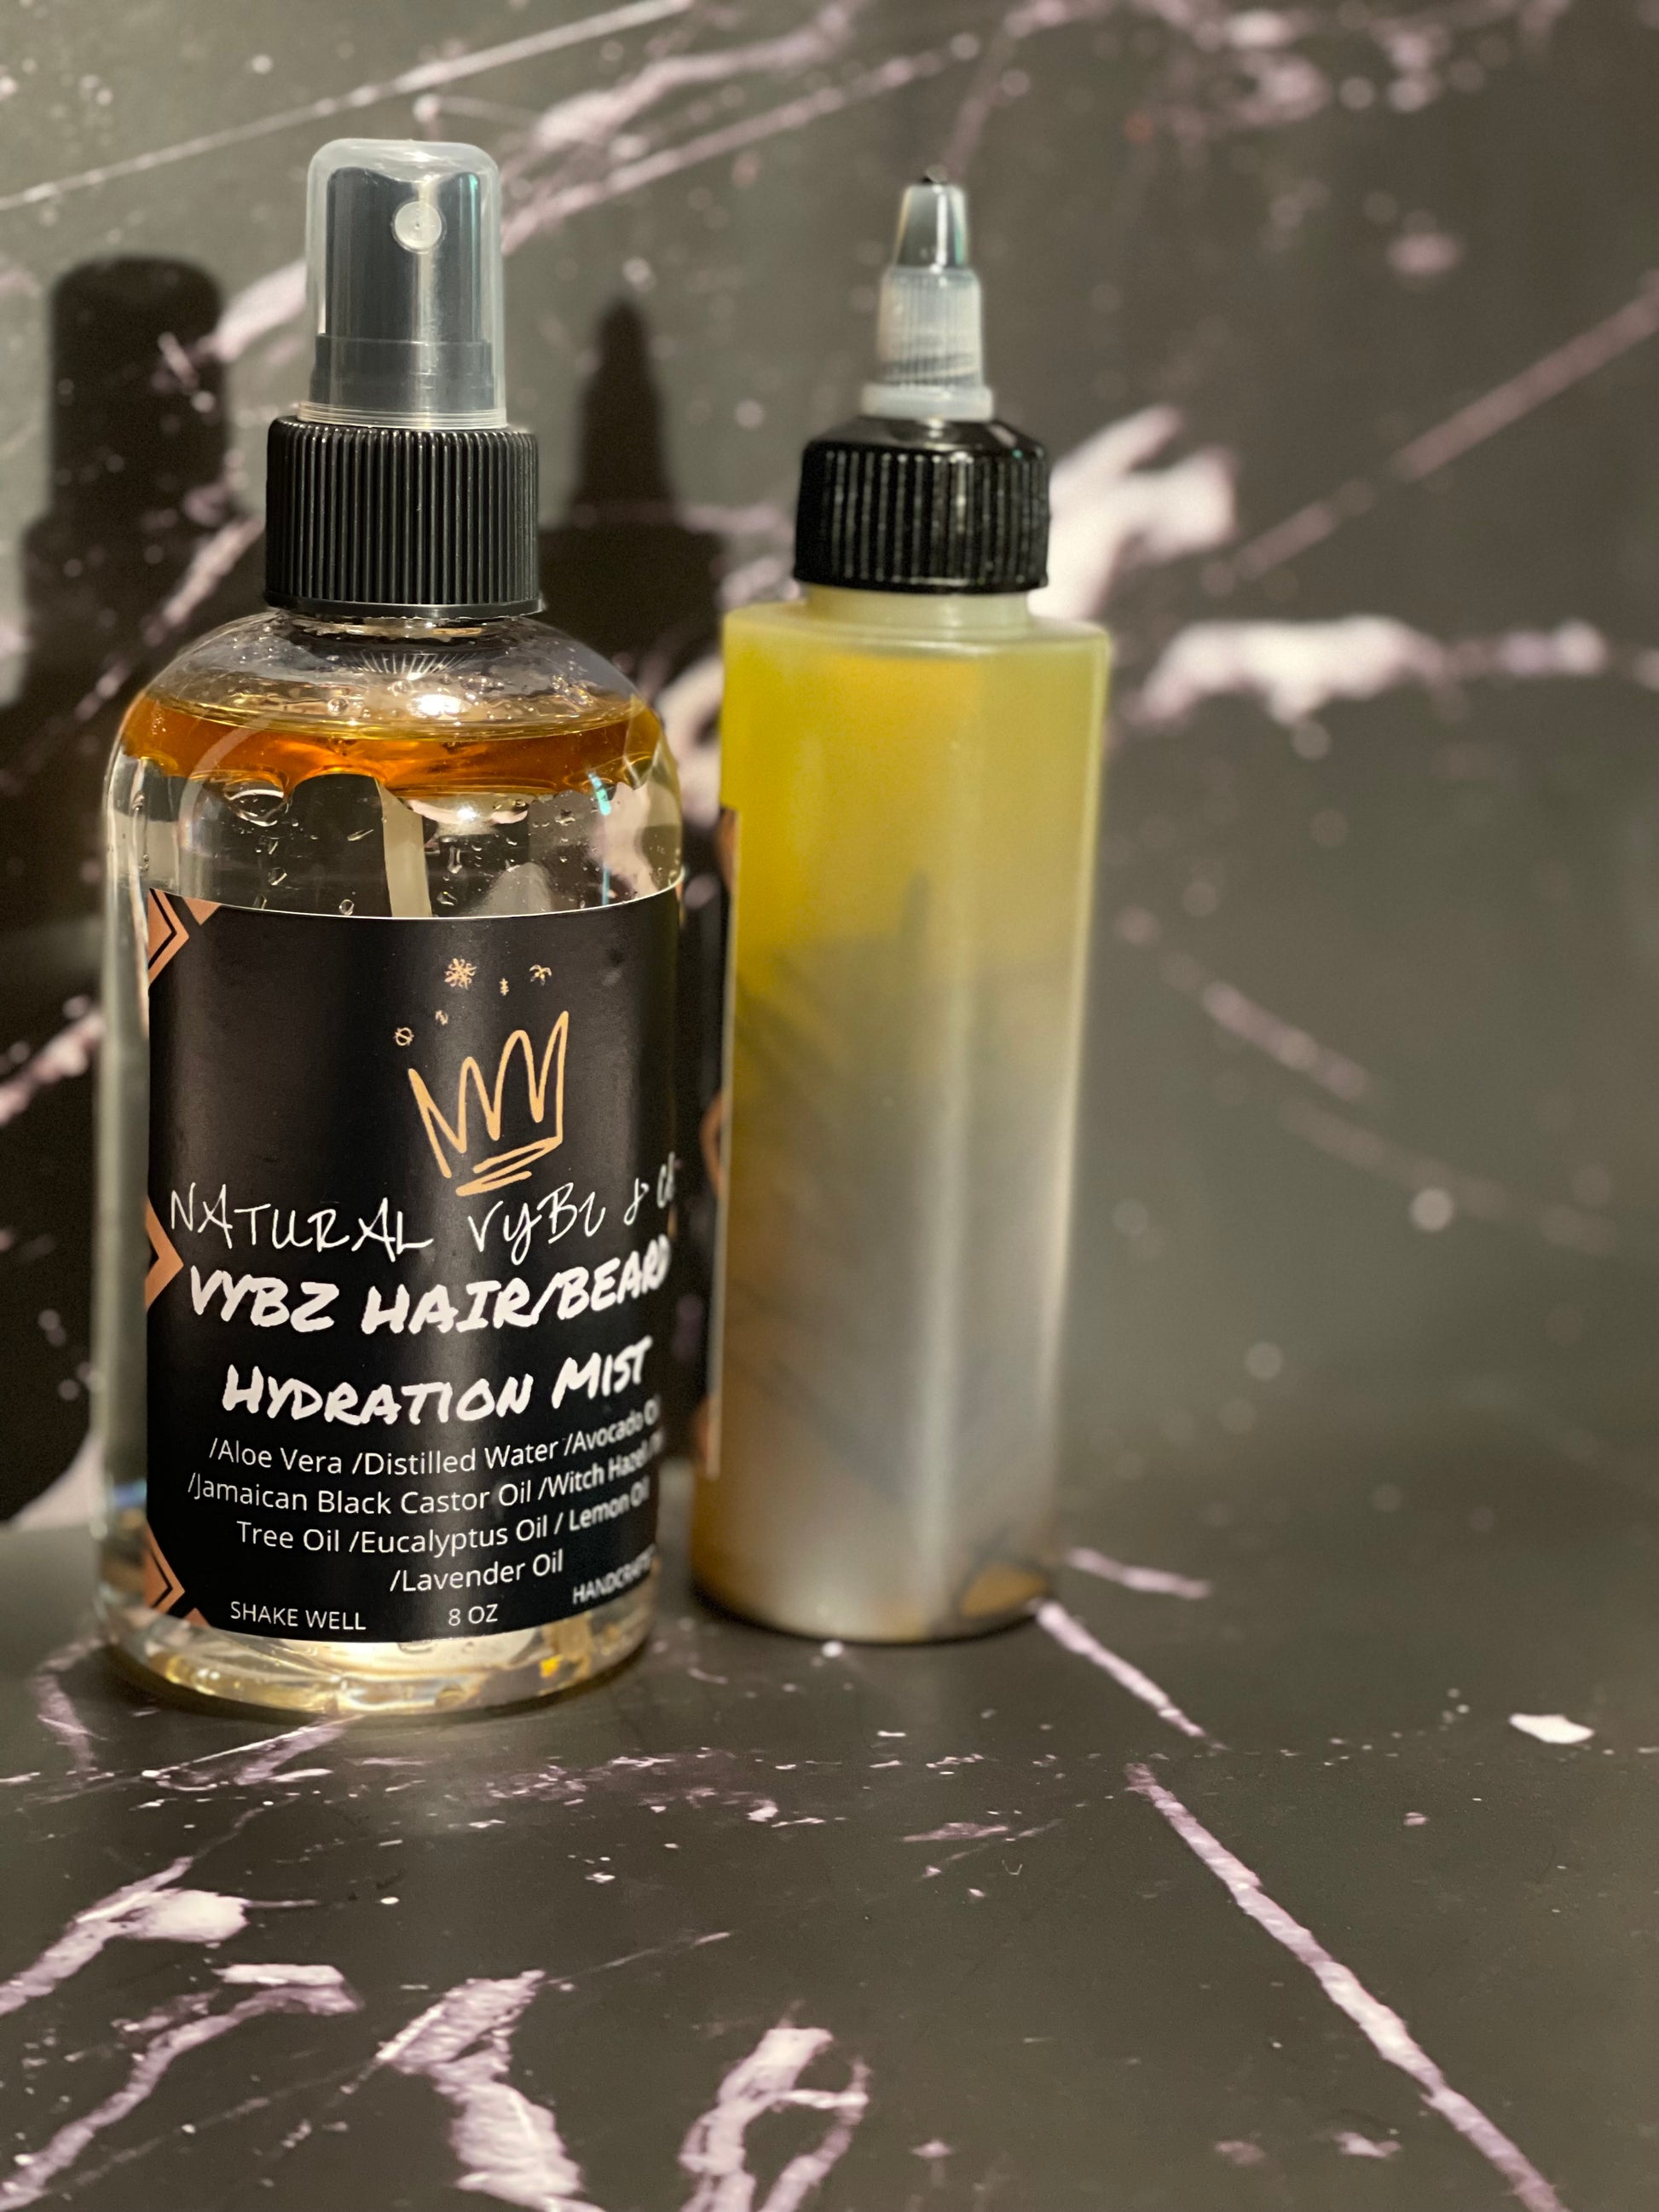 Growth oil naturally infused with rosemary herb and natural oils to promote and stimulate hair and beard growth